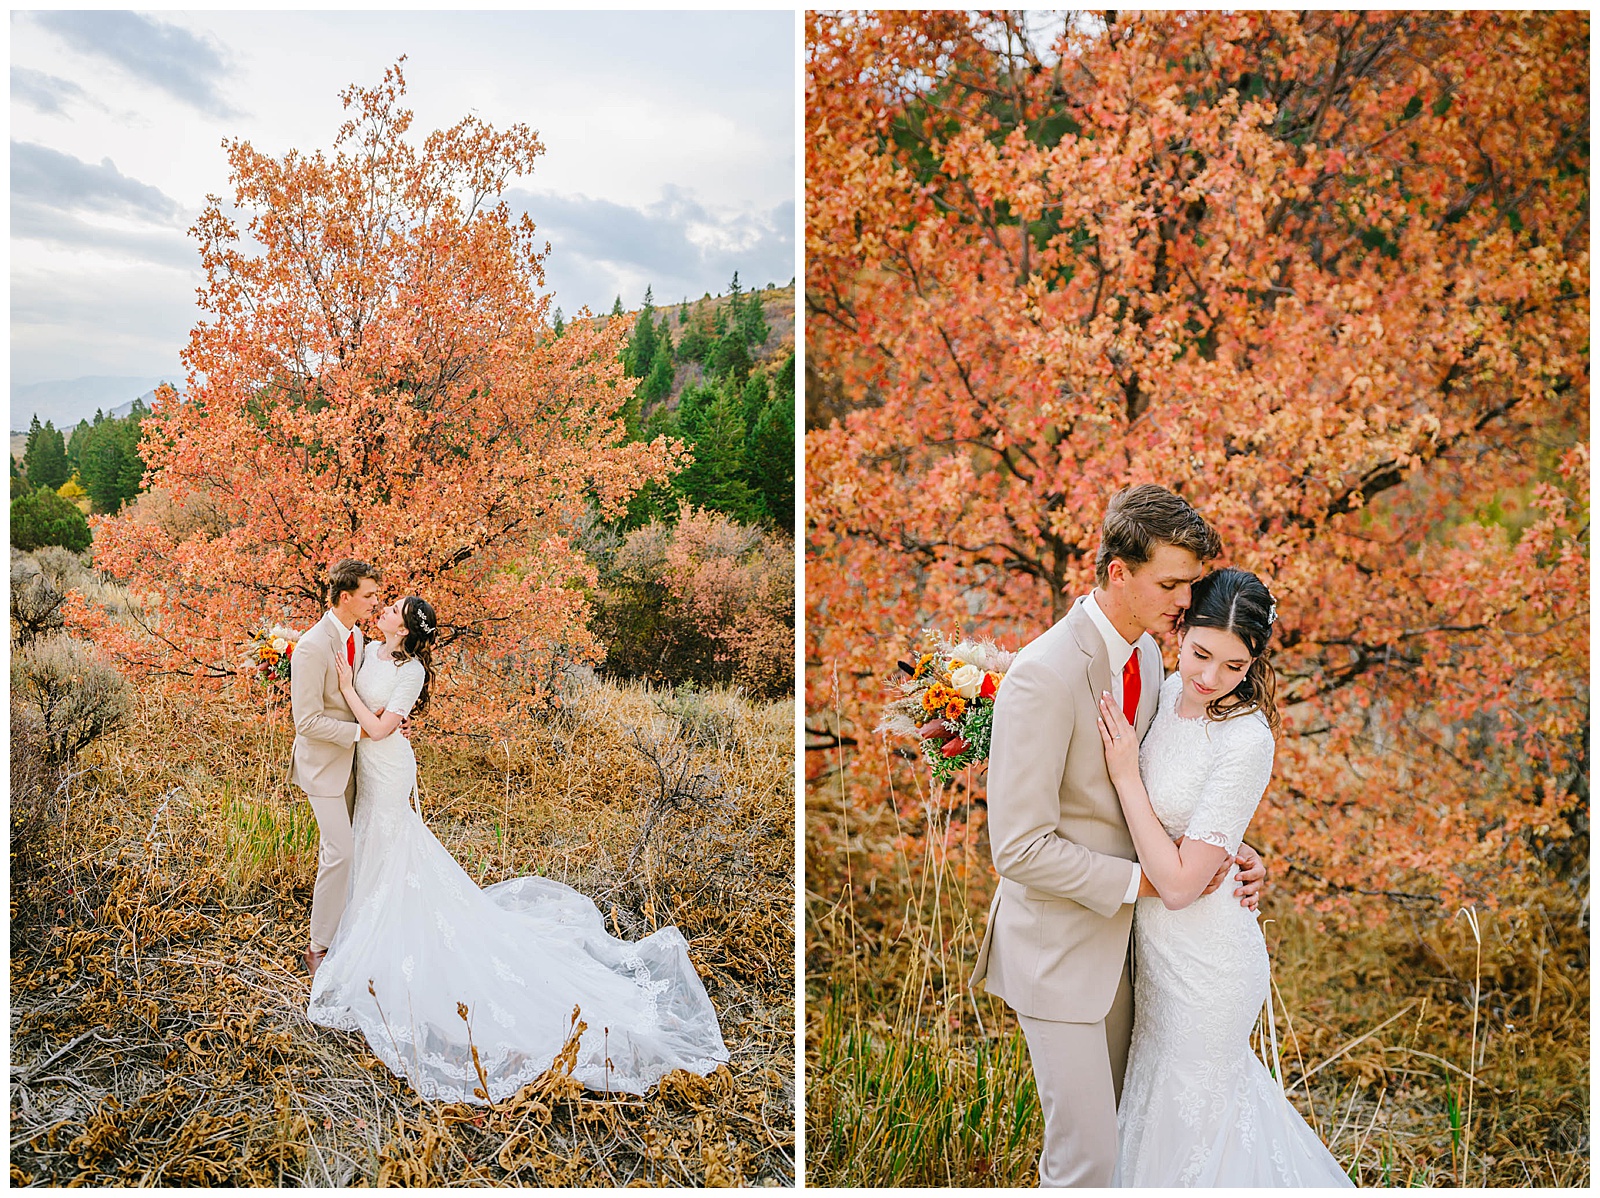 Gibson Jack Fall Bridals